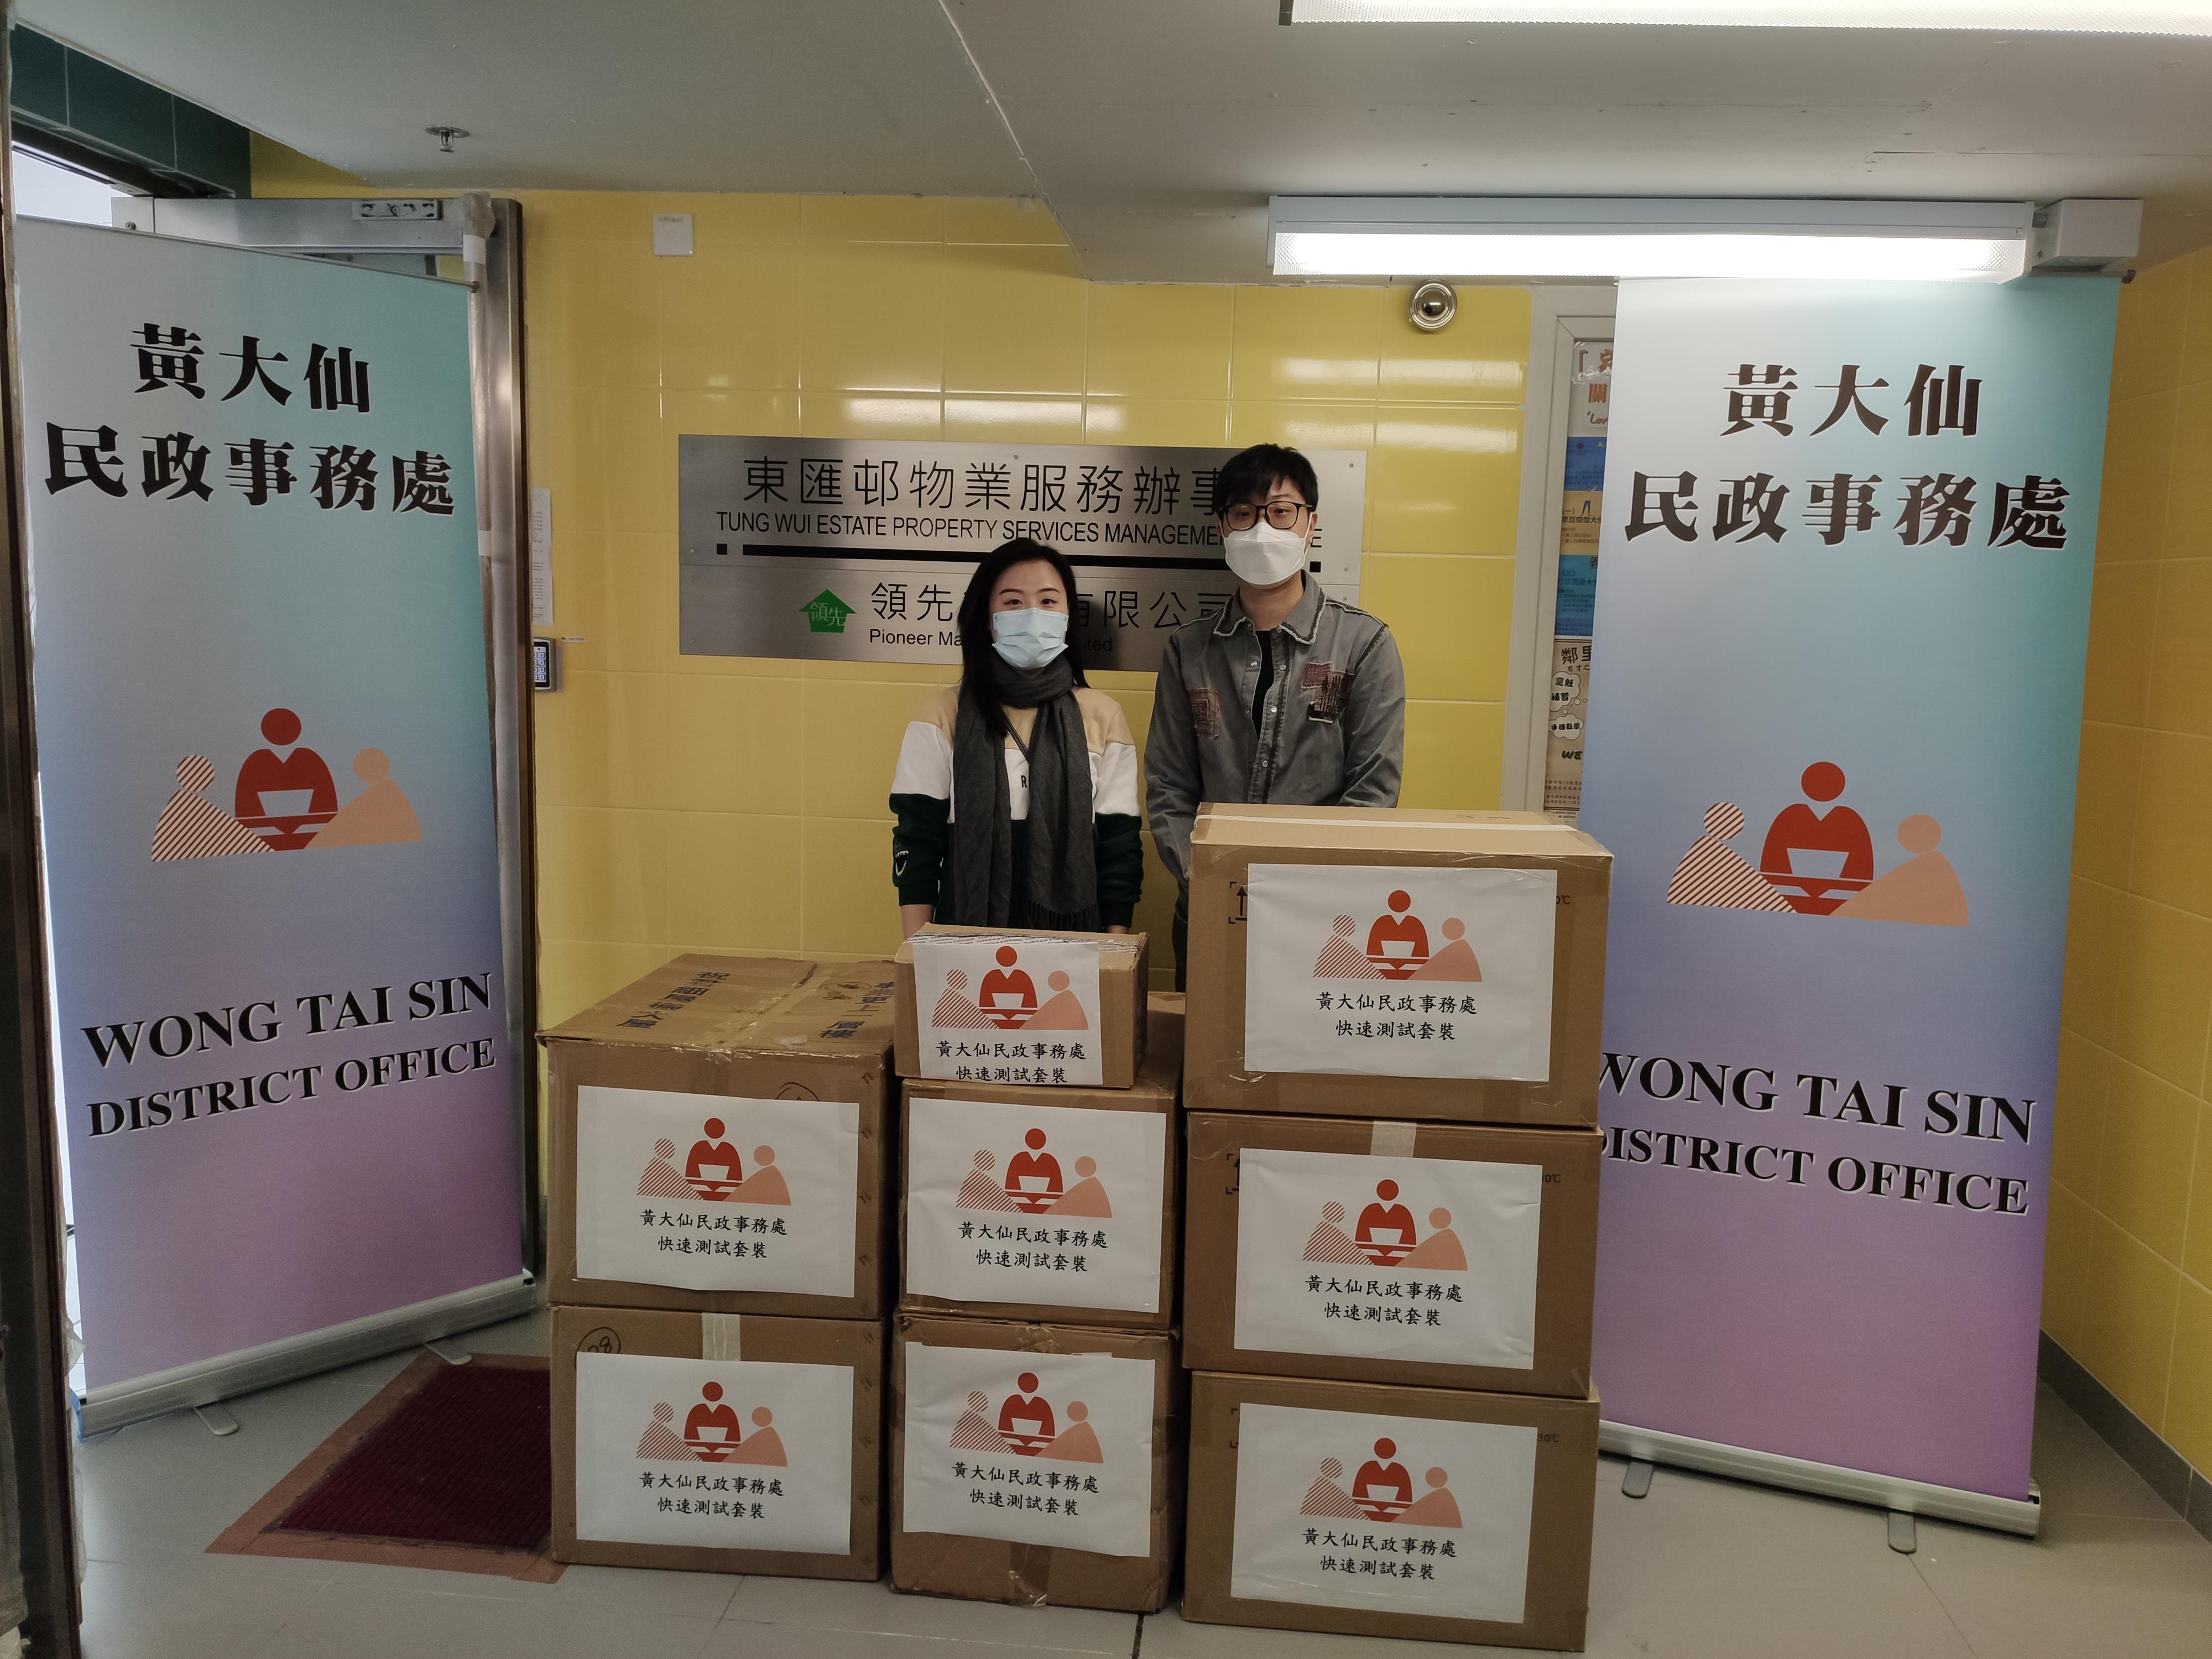 The Wong Tai Sin District Office today (February 28) distributed COVID-19 rapid test kits to households, cleansing workers and property management staff living and working in Tung Wui Estate in Wong Tai Sin for voluntary testing through the property management company. 